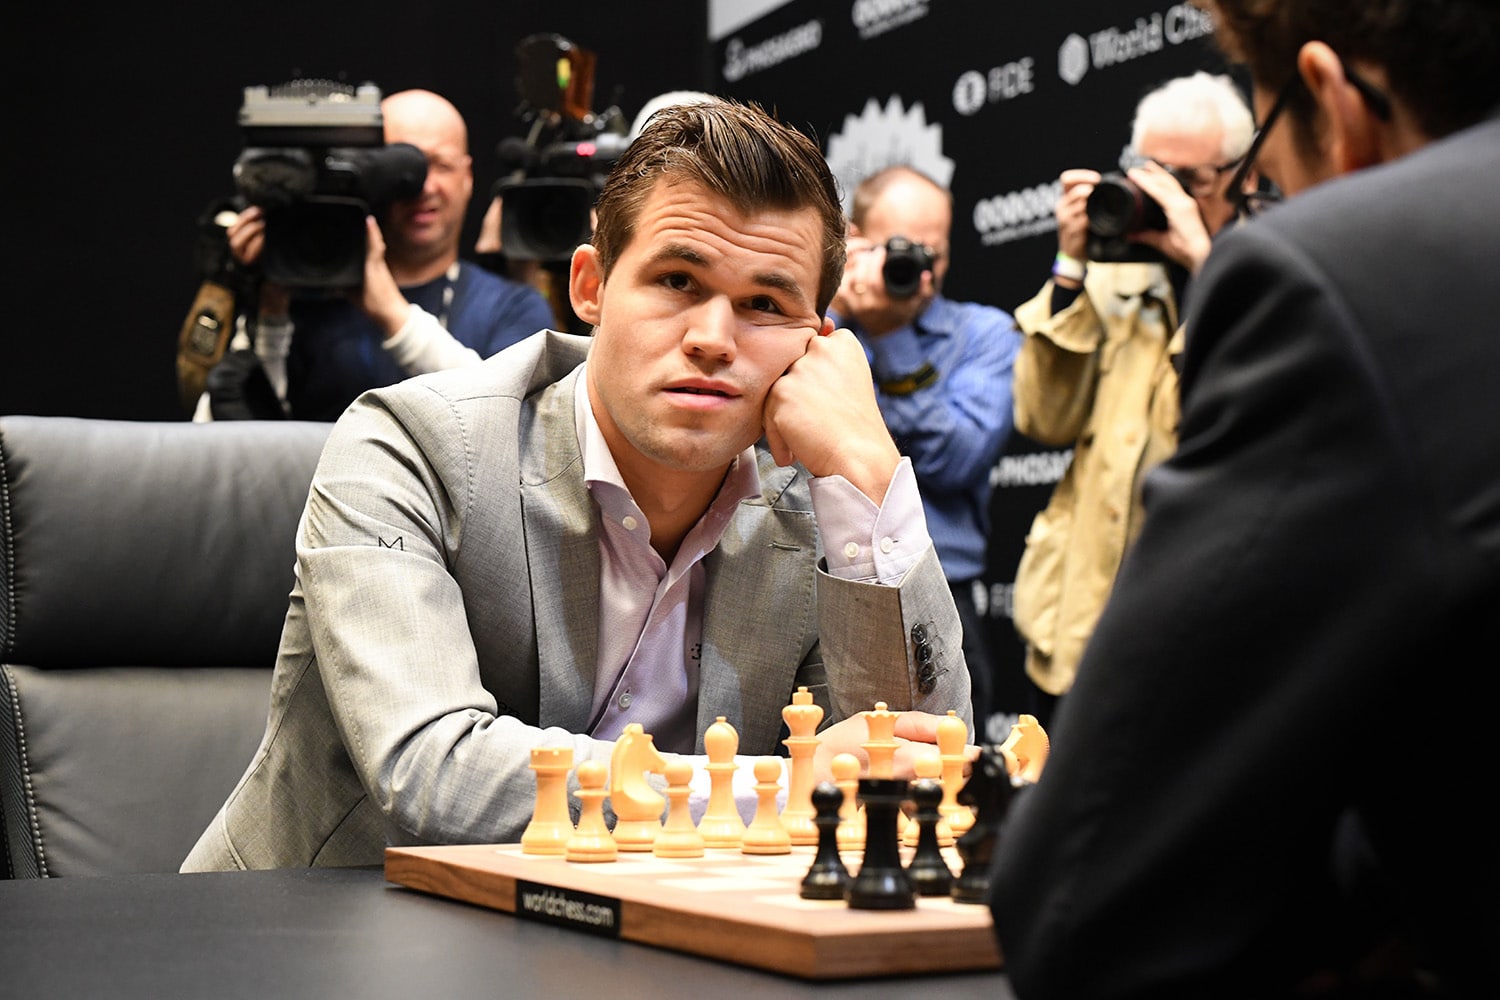 Highest paid cheater in chess history? - Chess News And Views